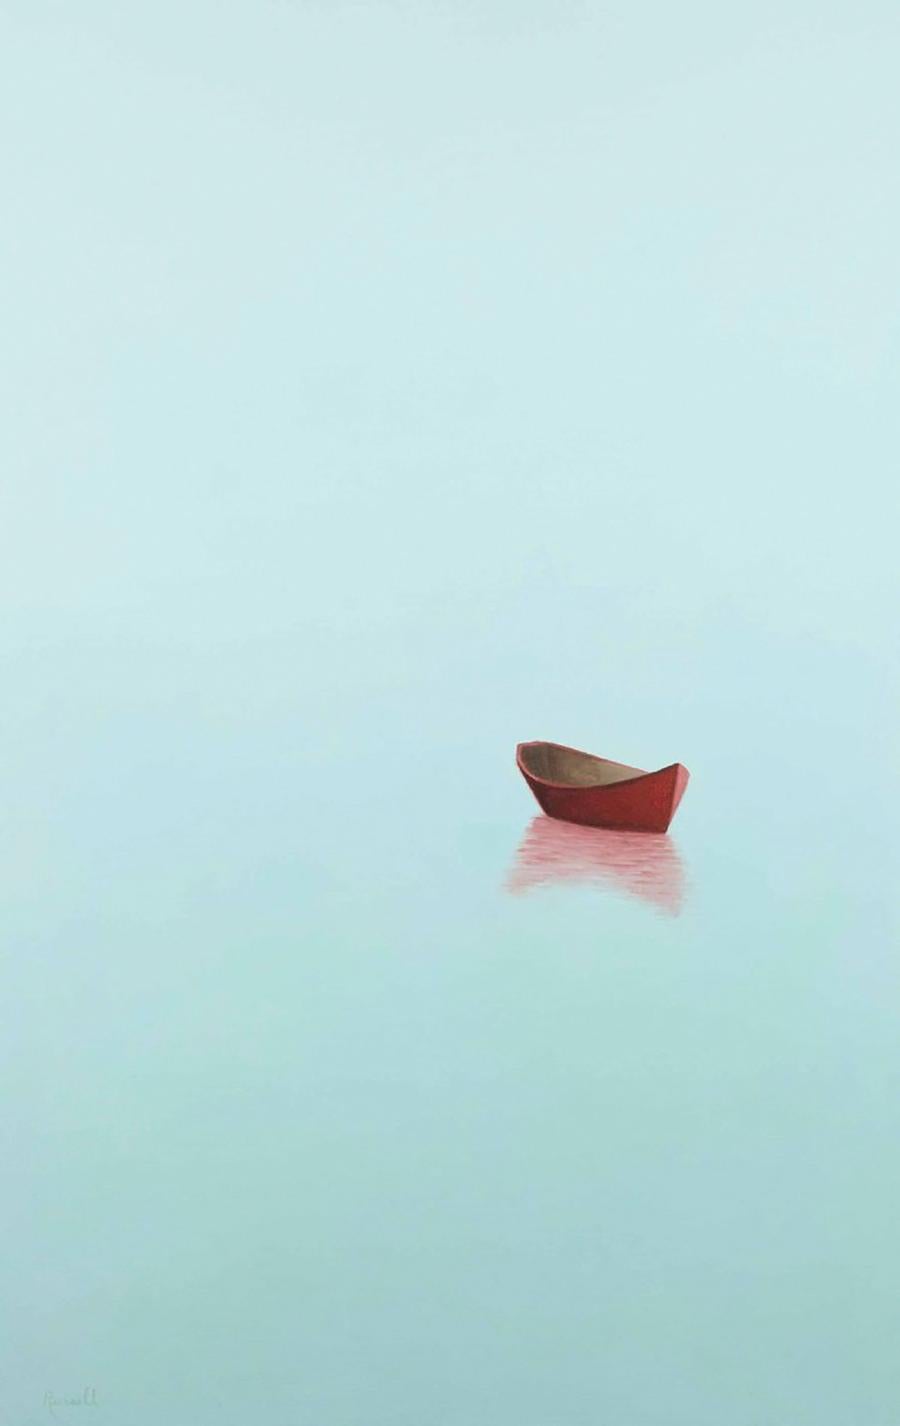 "Mystic Morning" is a 48x30 oil painting on canvas by artist Matthew Jay Russell, featuring an empty red dory floating on the water while light skies fade into the hazy soft blue horizon and waterline. The empty boat gives a sense of calm while the